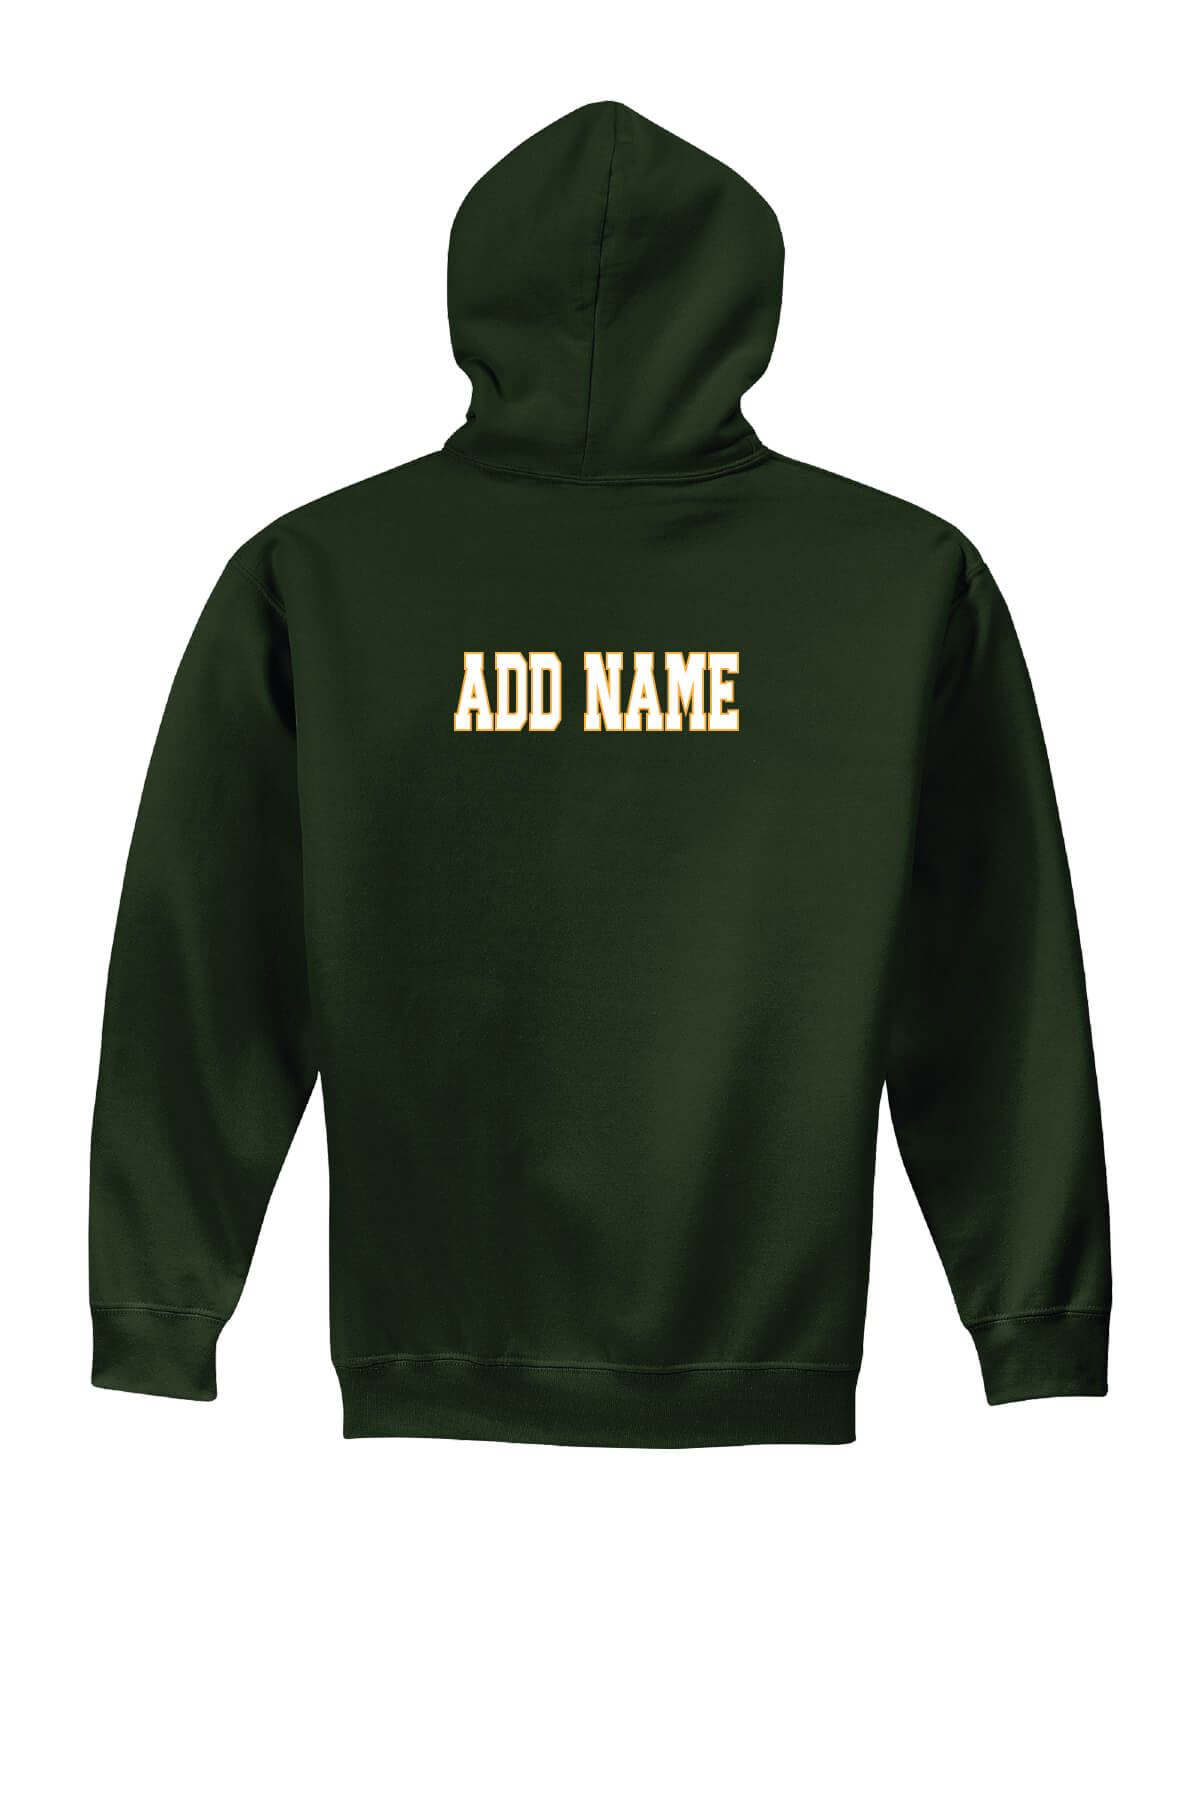 Spartans XC Hoodie back-green